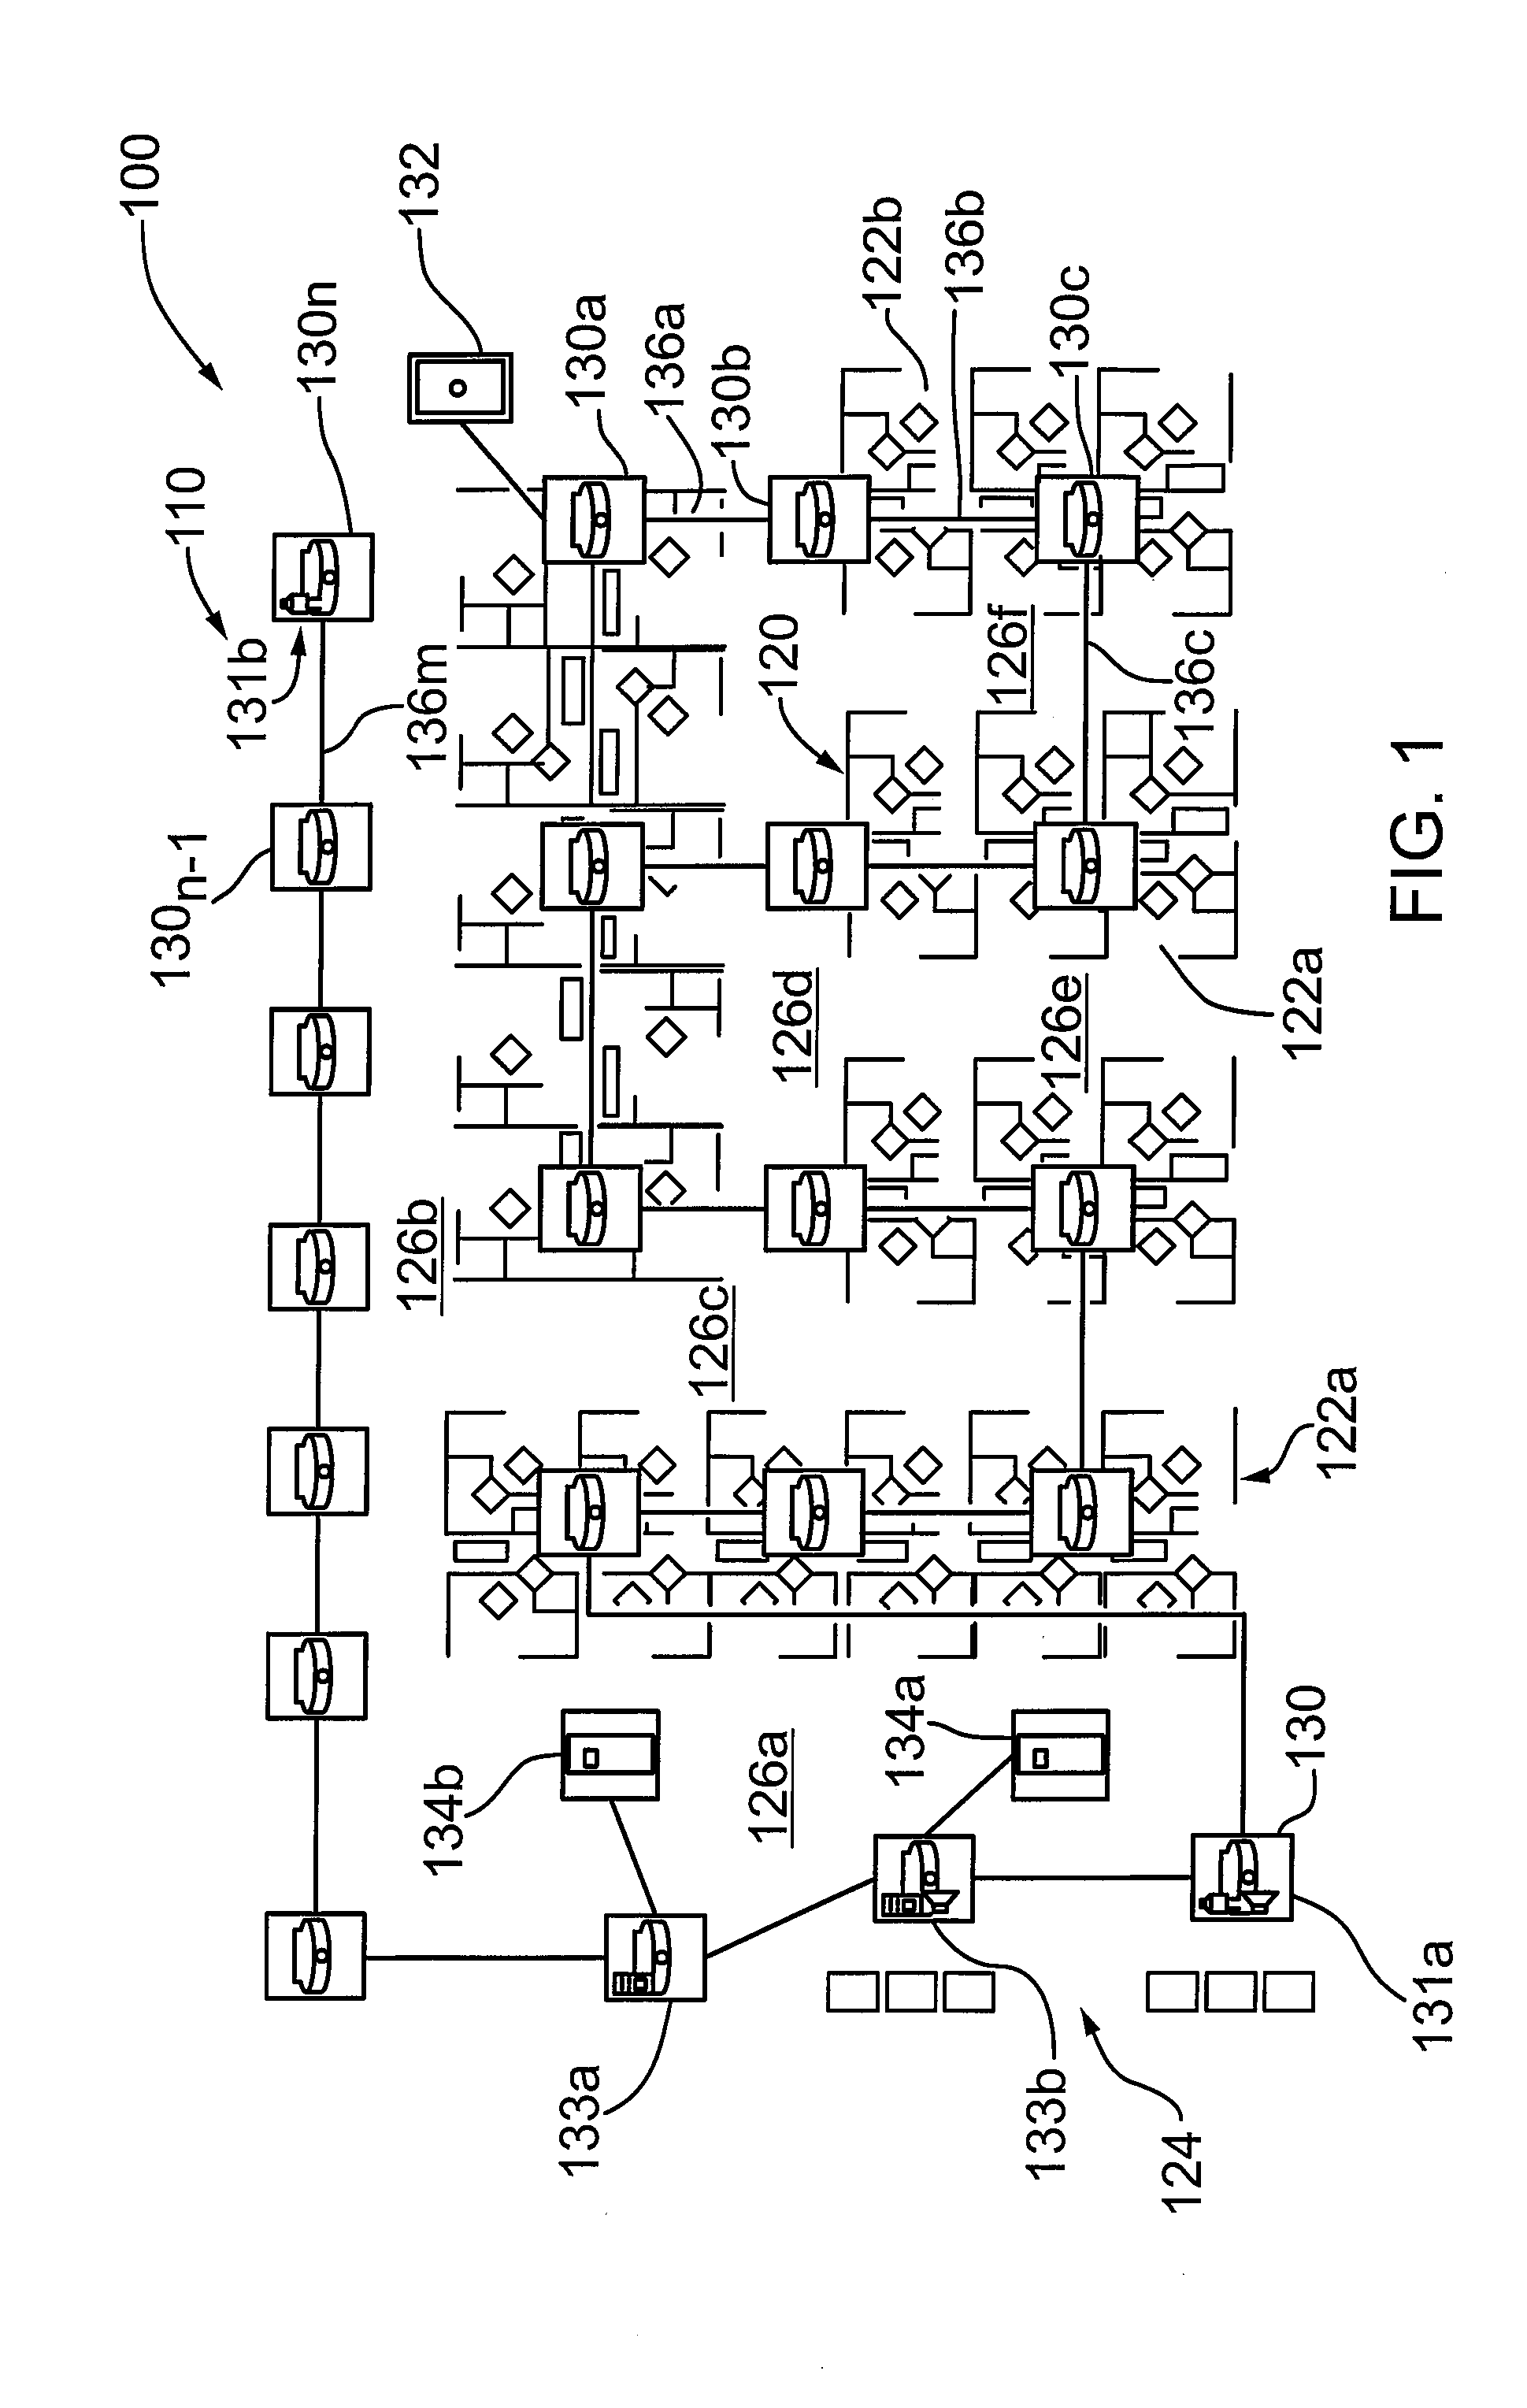 System and method for monitoring/controlling a sound masking system from an electronic floorplan